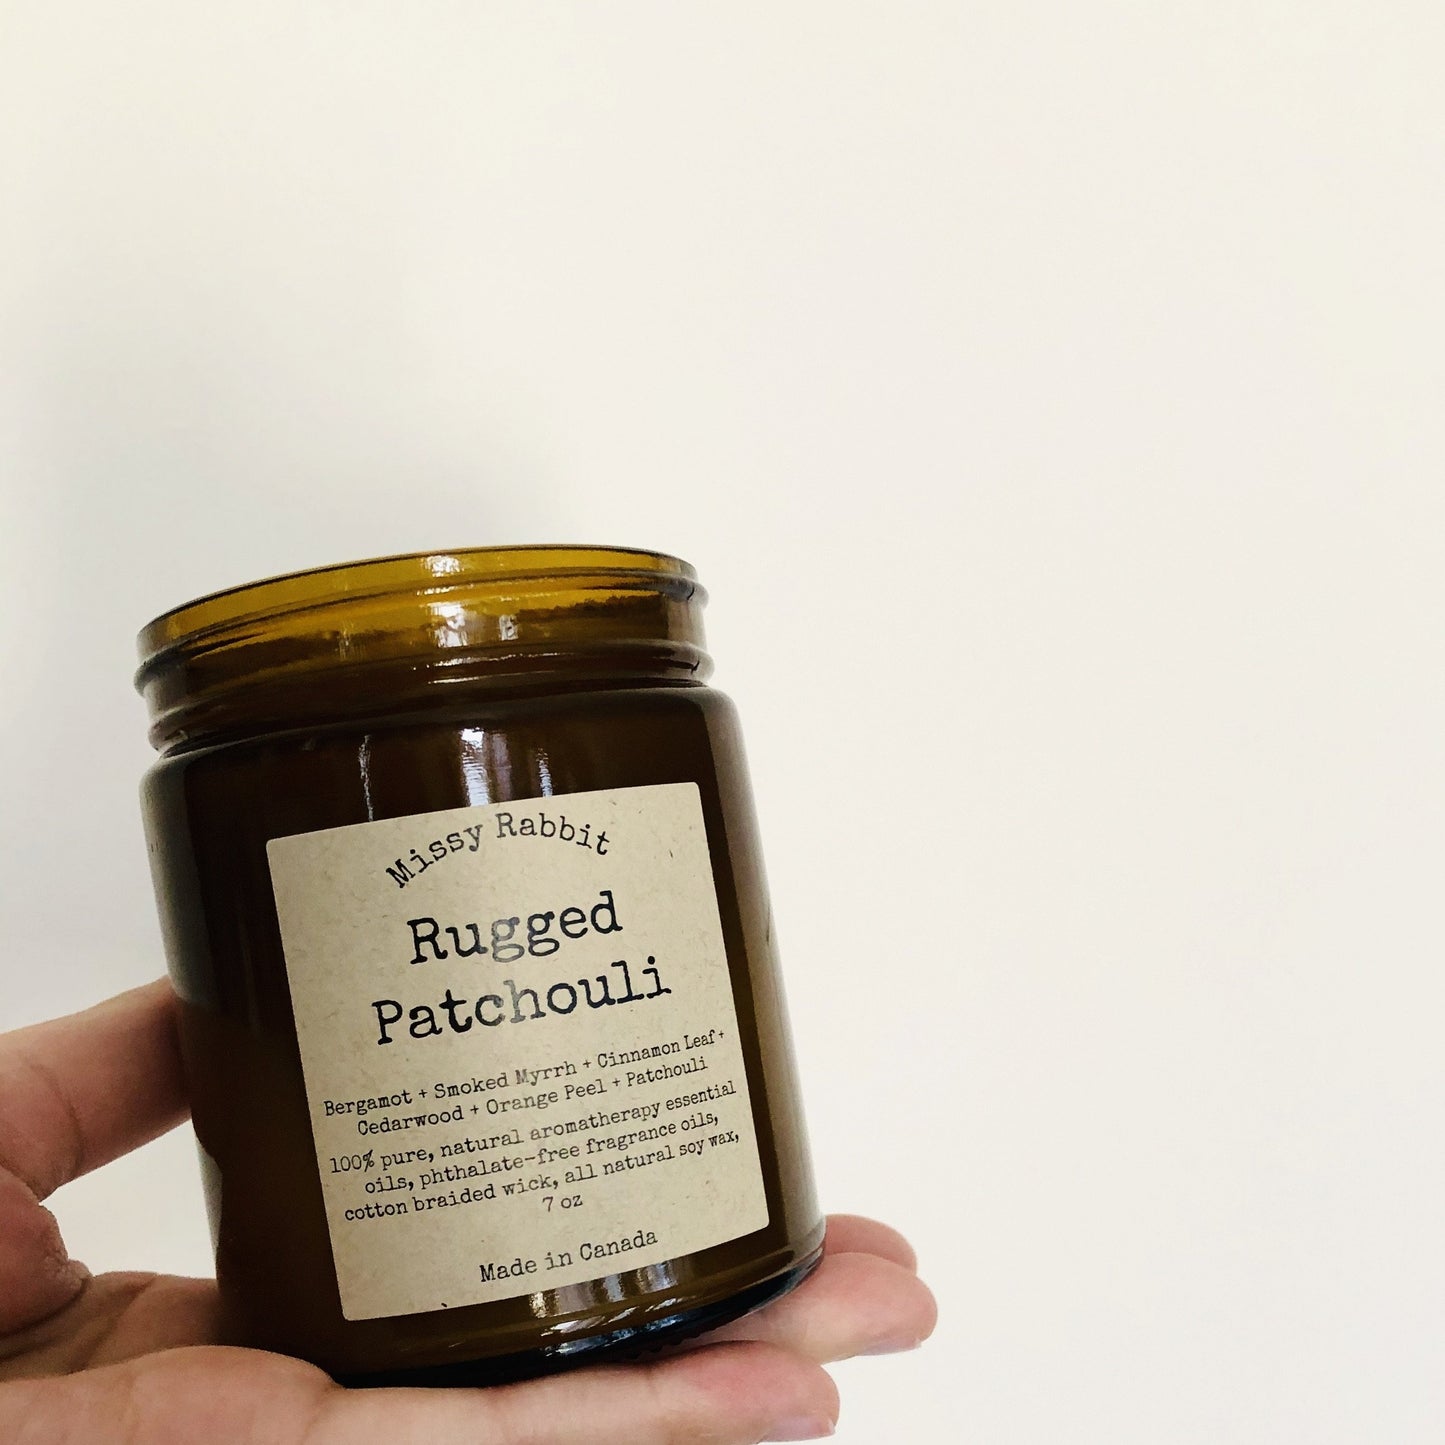 Rugged Patchouli Handcrafted Soy Candle